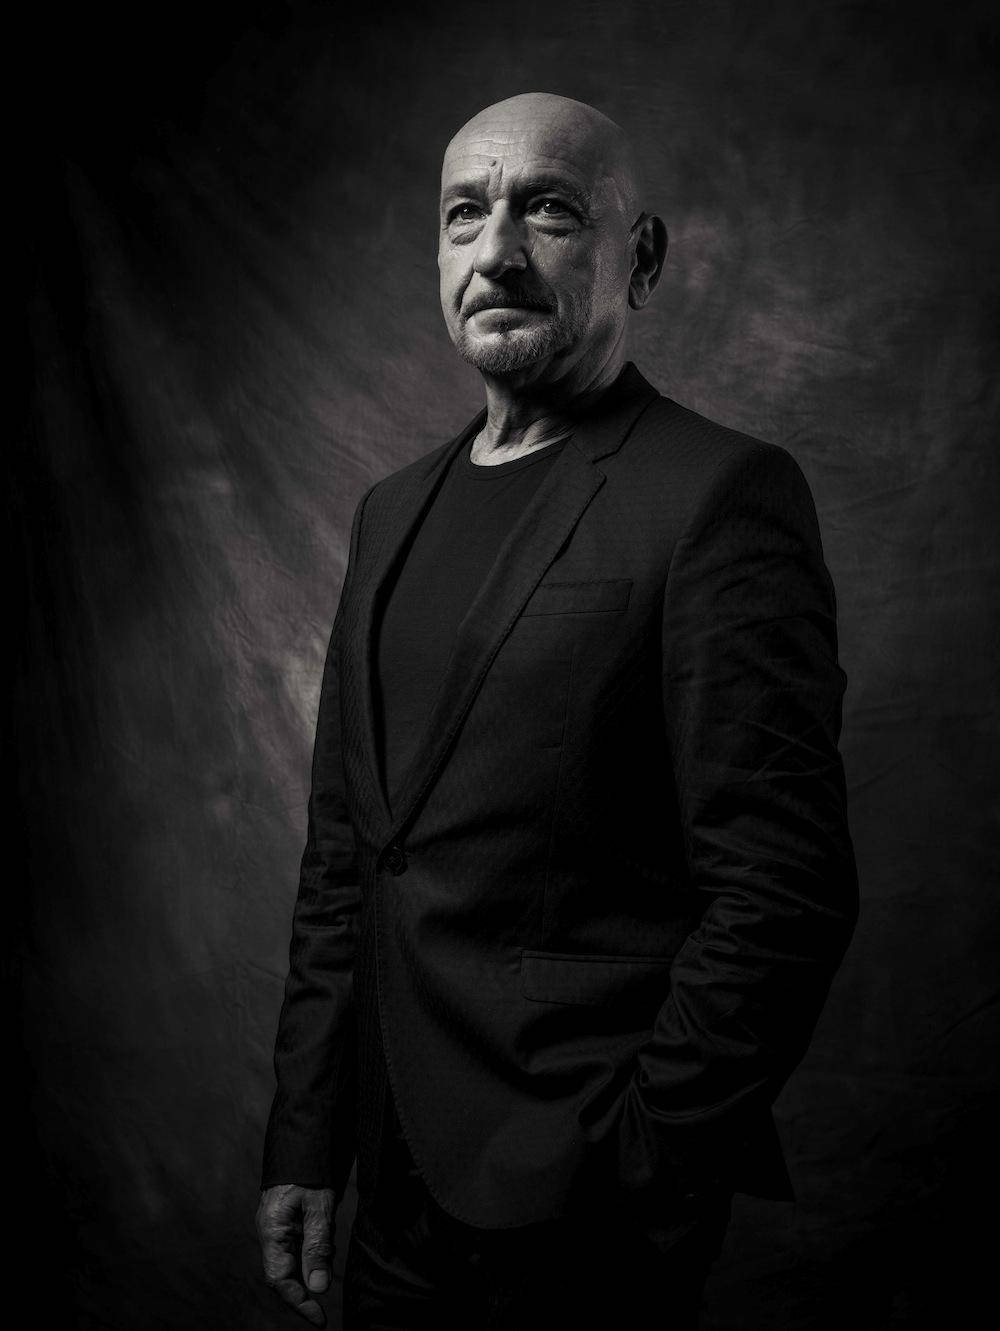 Caption: Accomplished English Actor - Ben Kingsley in a Monochrome Portrait Wallpaper